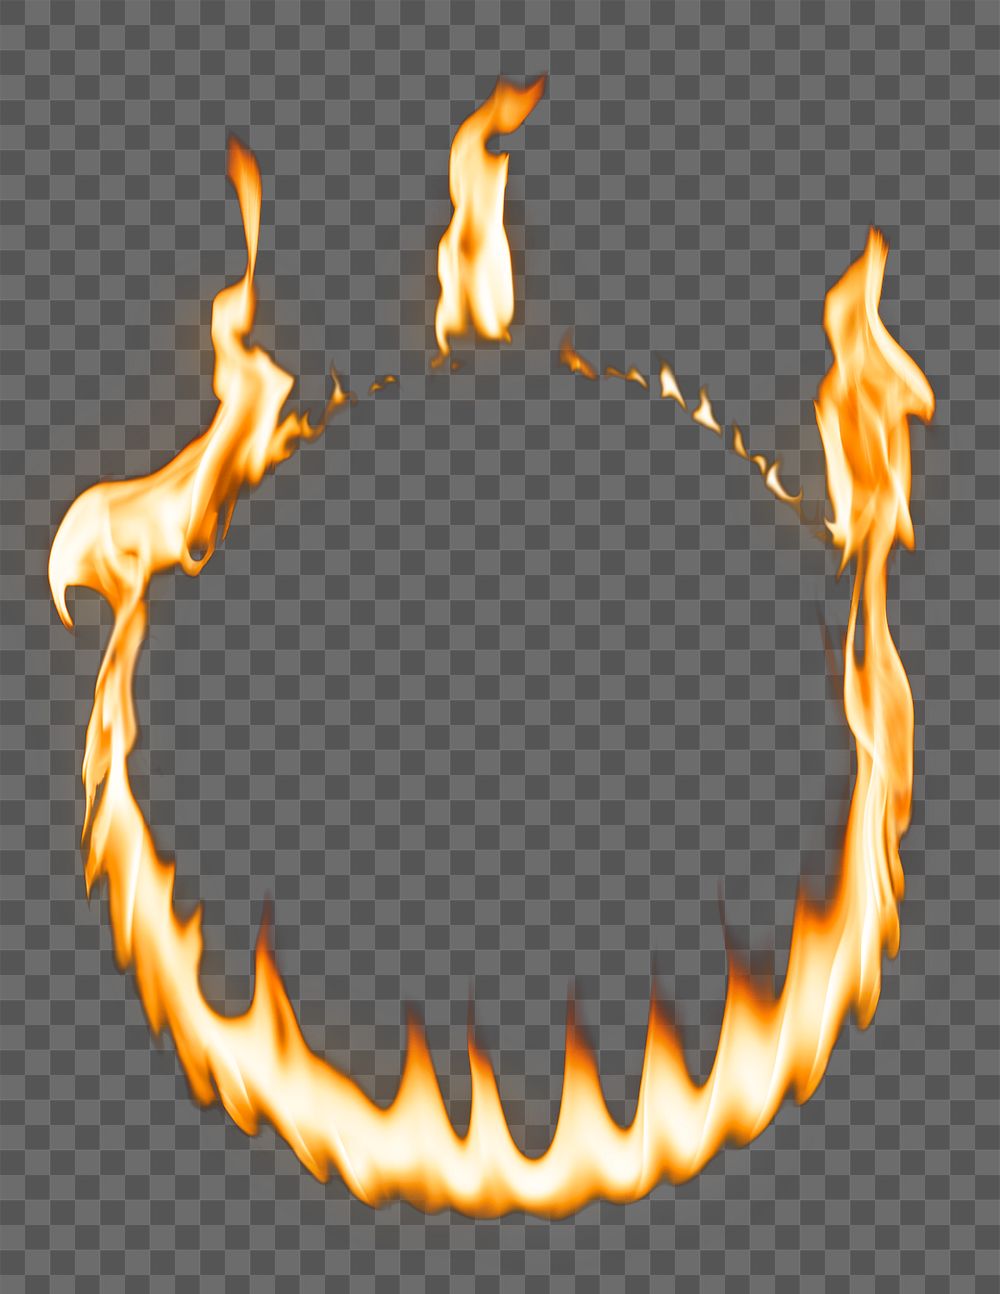 Flame png frame, circle shape, realistic burning fire